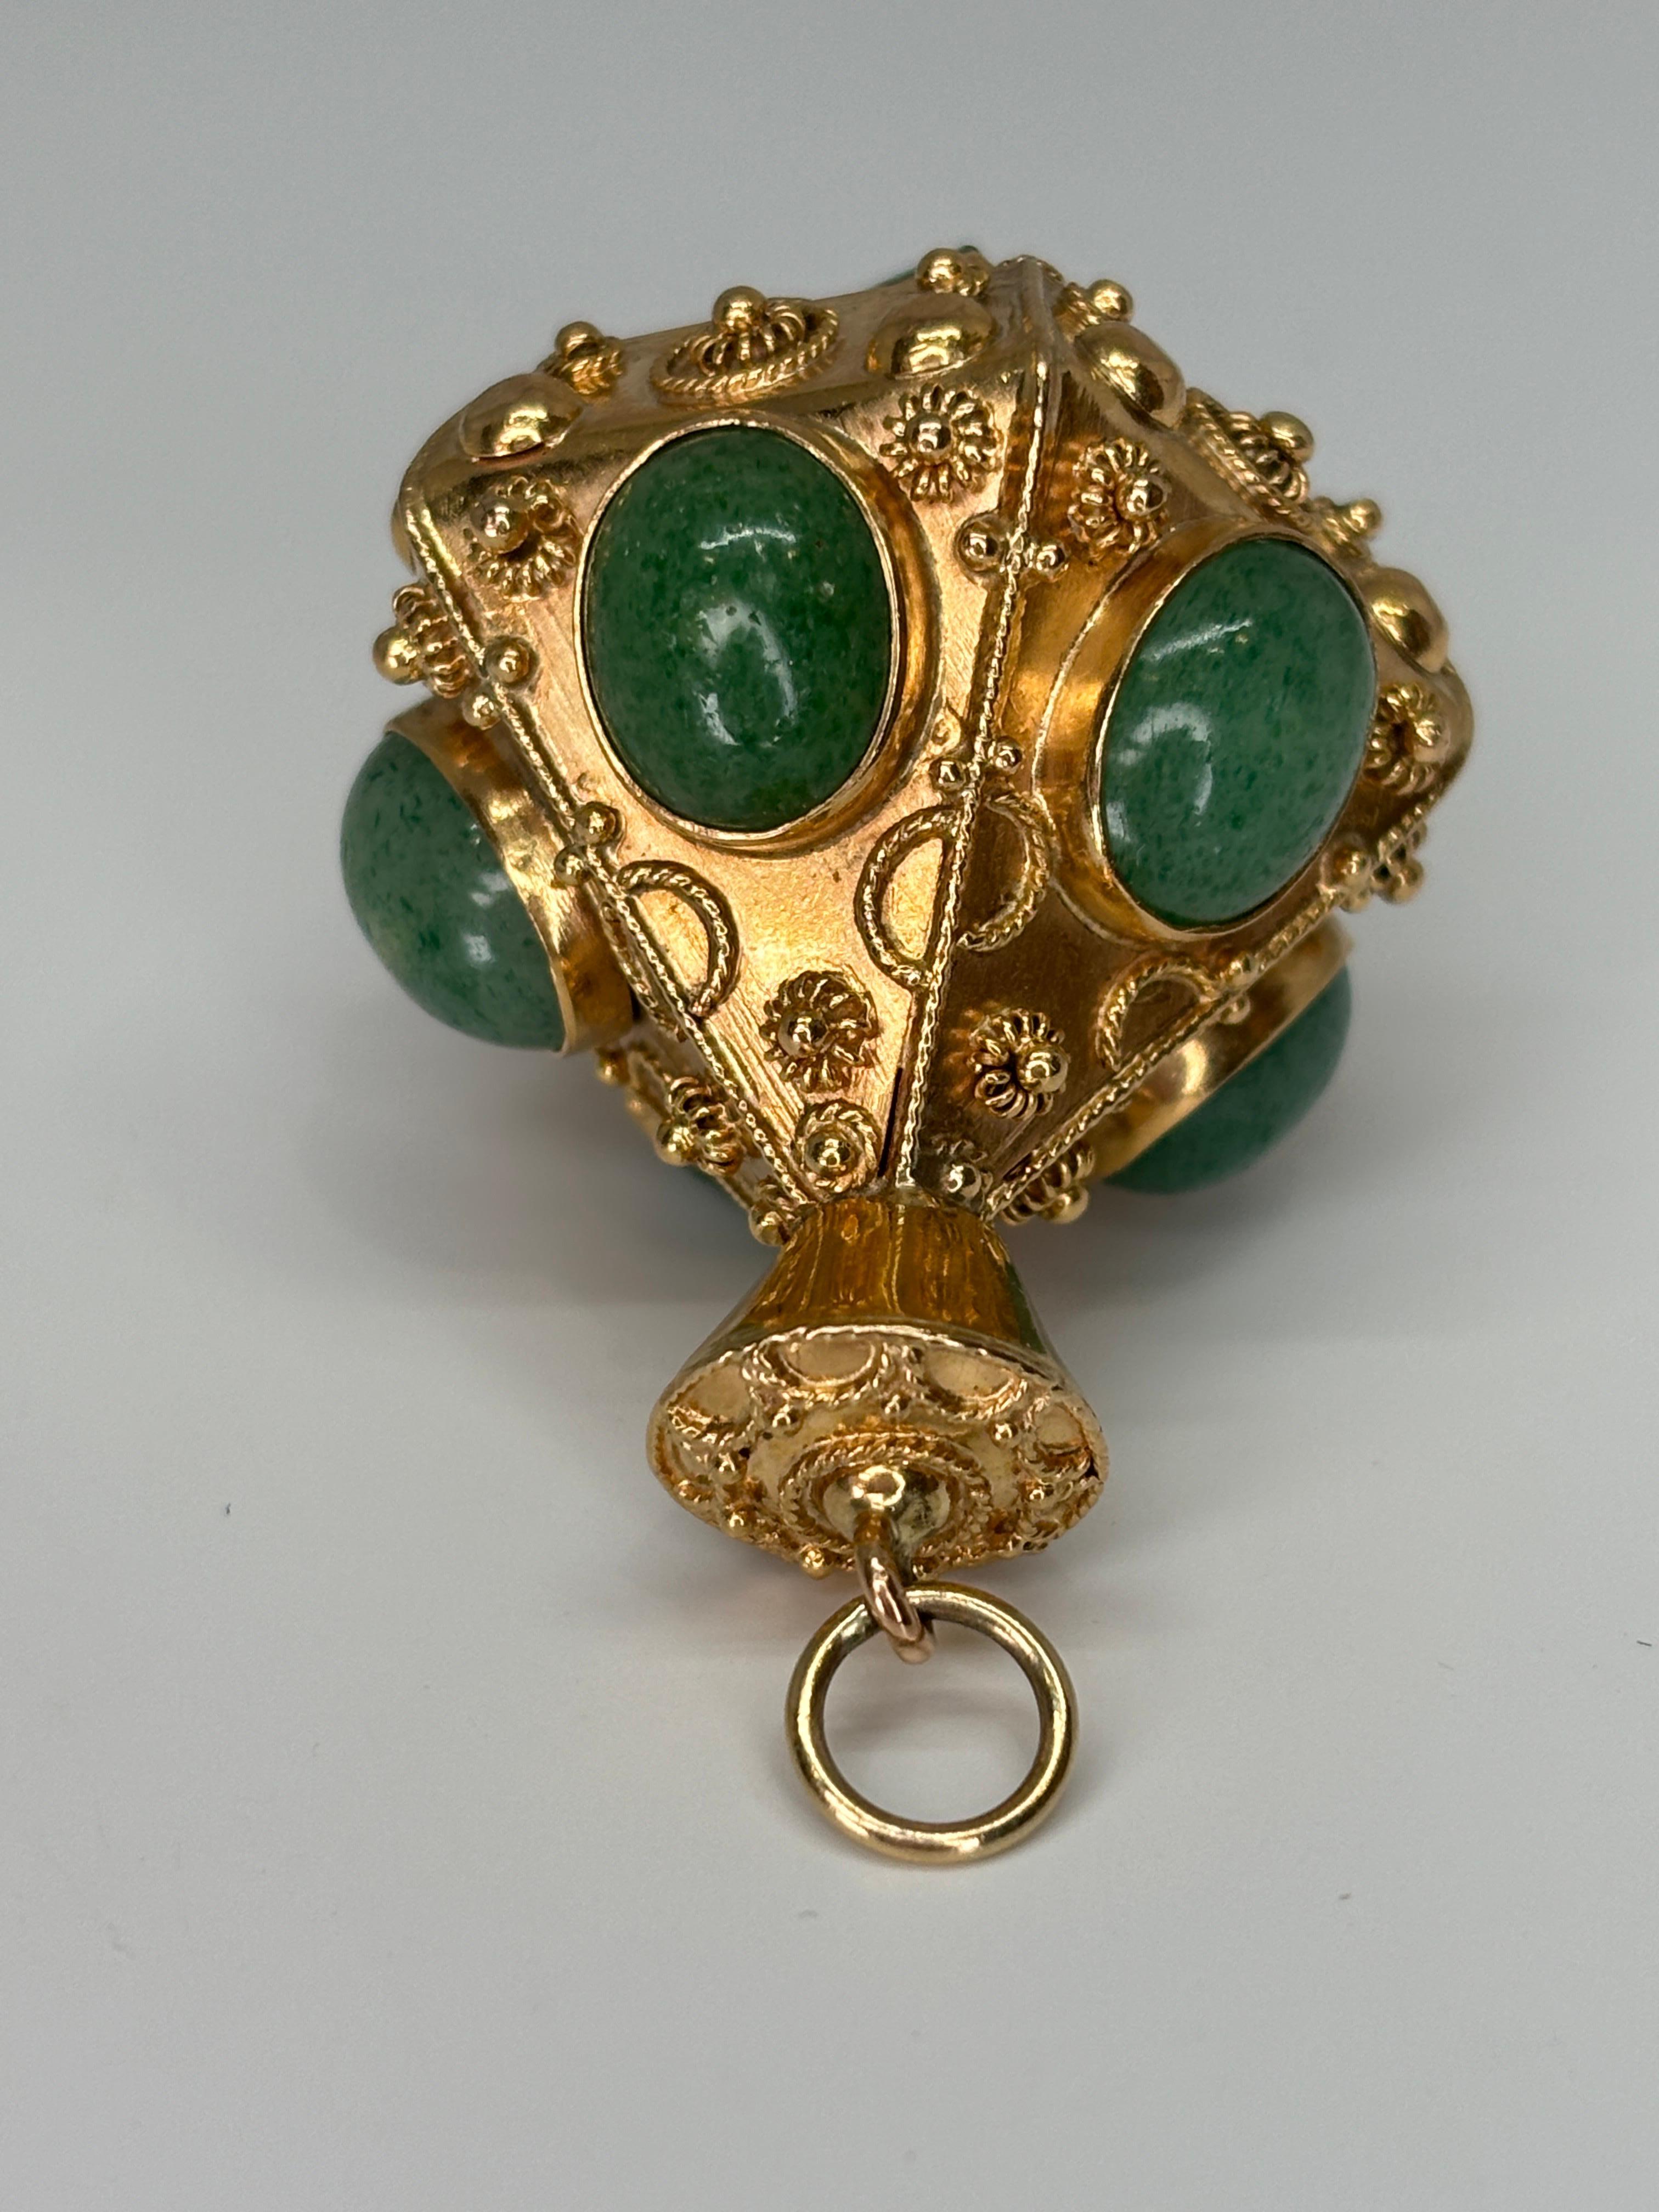 Large Italian 18k Gold Aventurine Etruscan Revival Watch Fob Pendant Charm For Sale 11